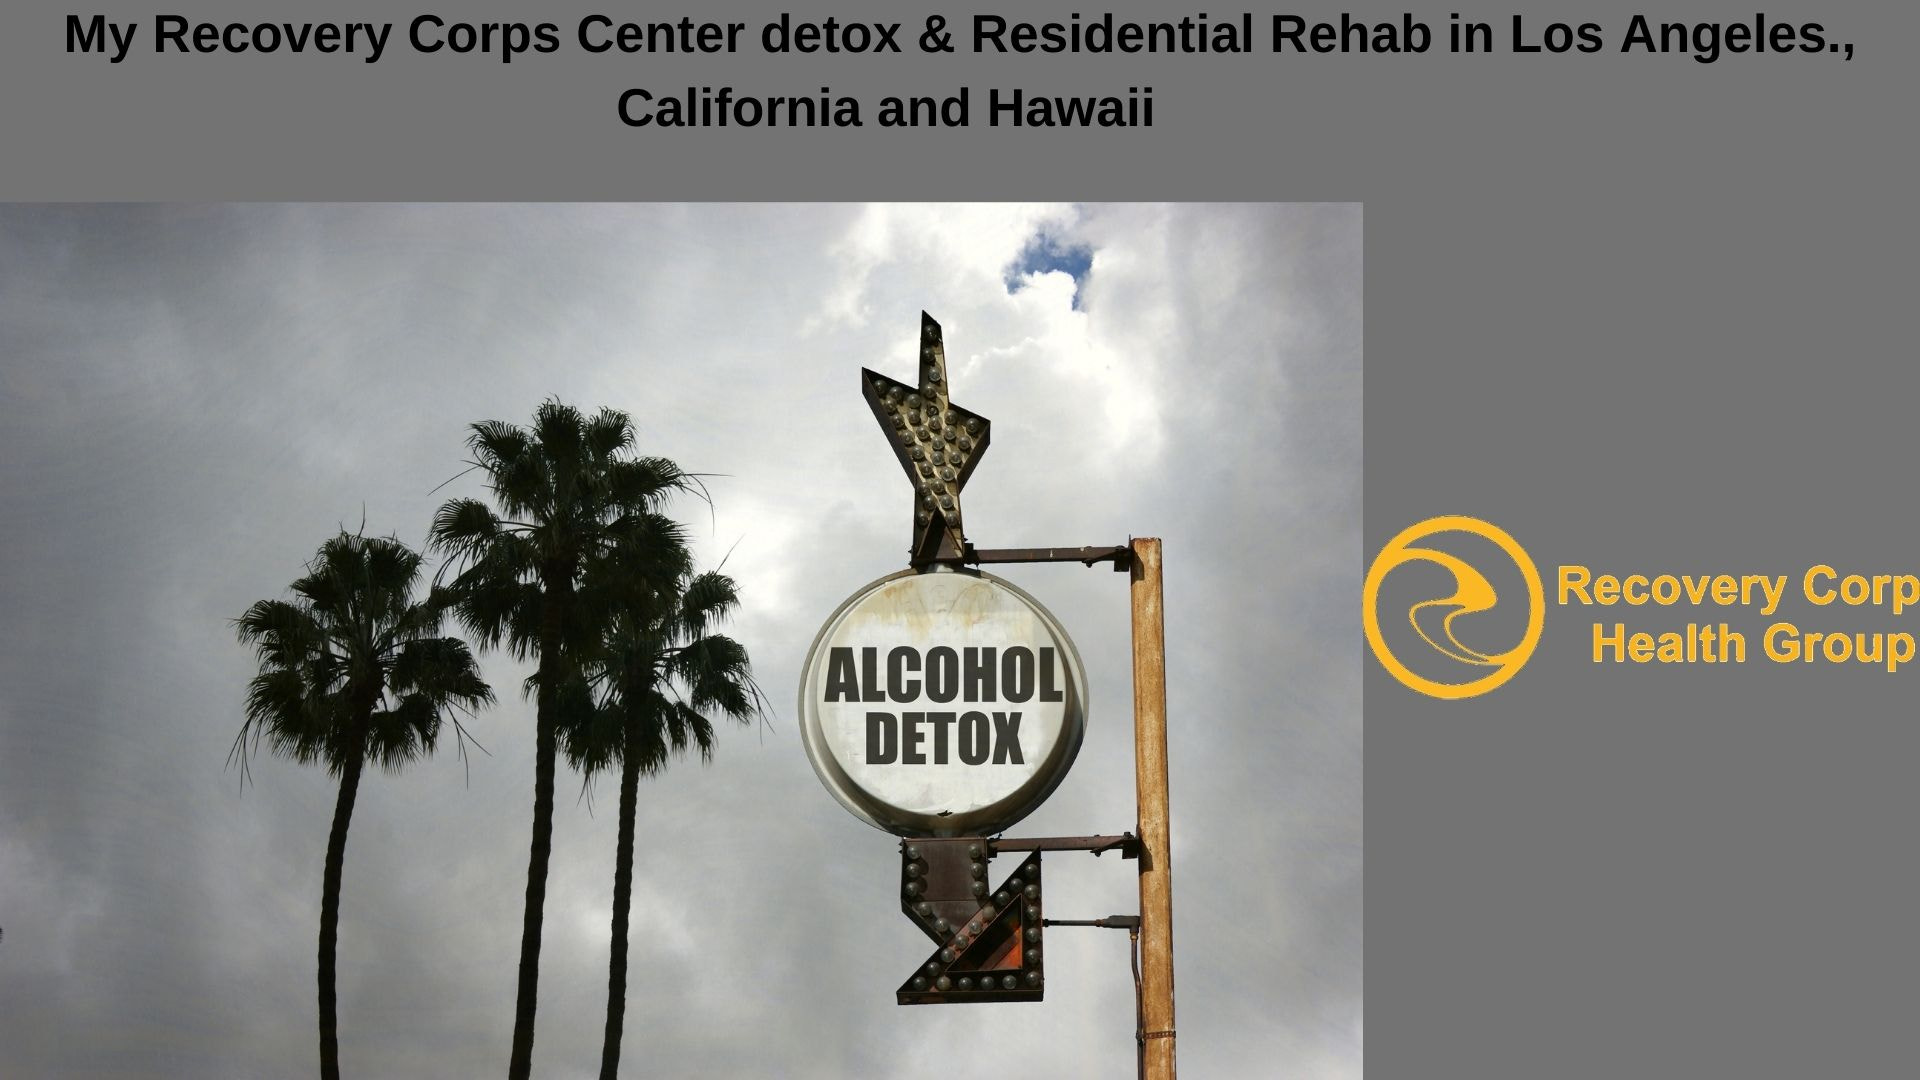 My Recovery Corps Center detox & Residential Rehab